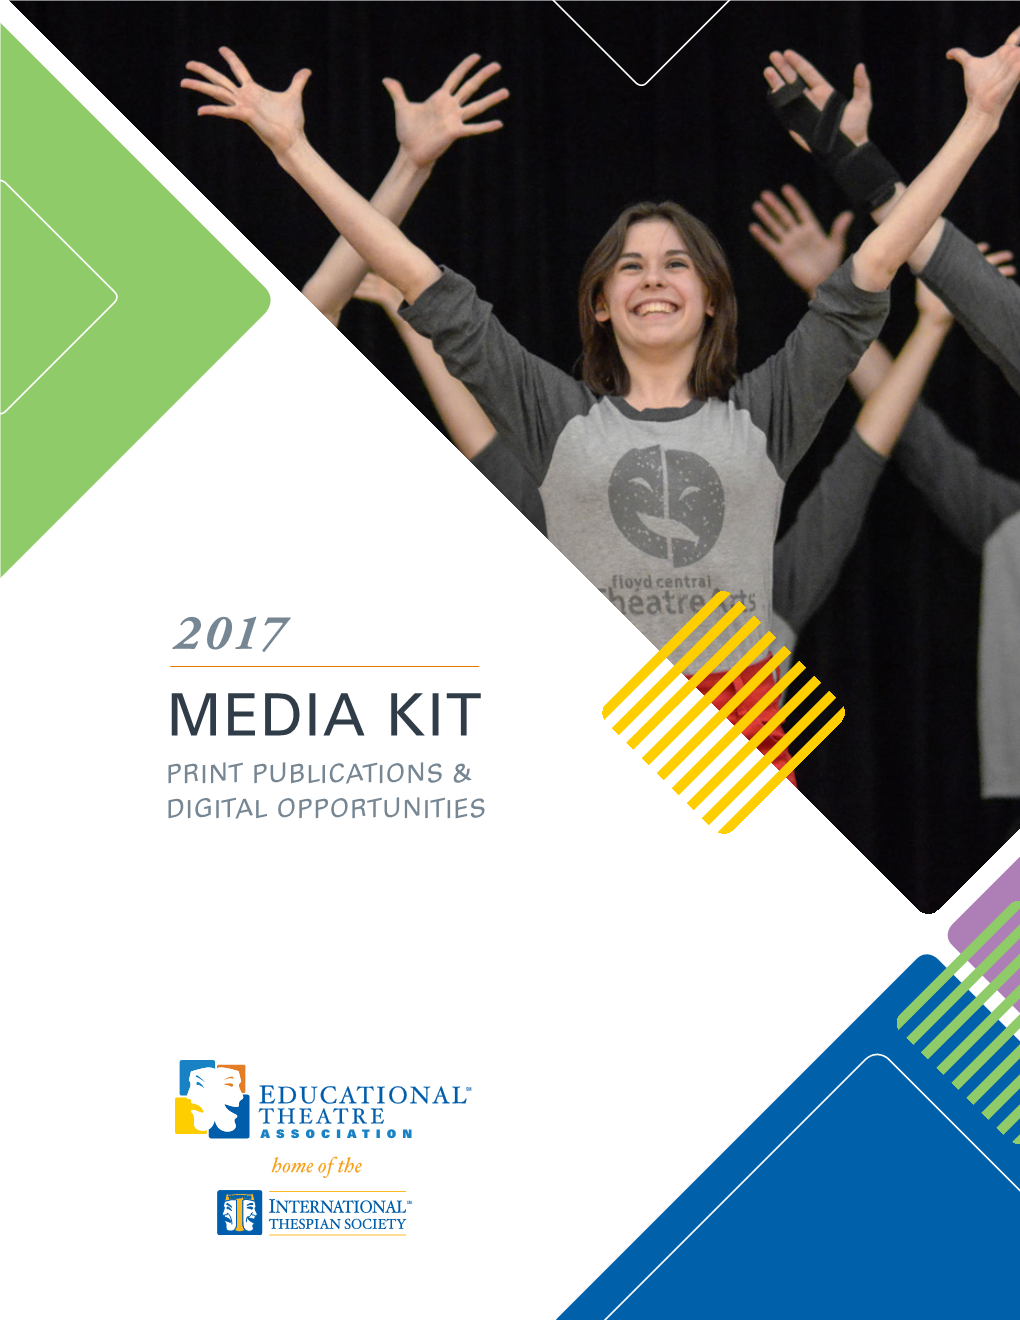 Media Kit Print Publications & Digital Opportunities Overview